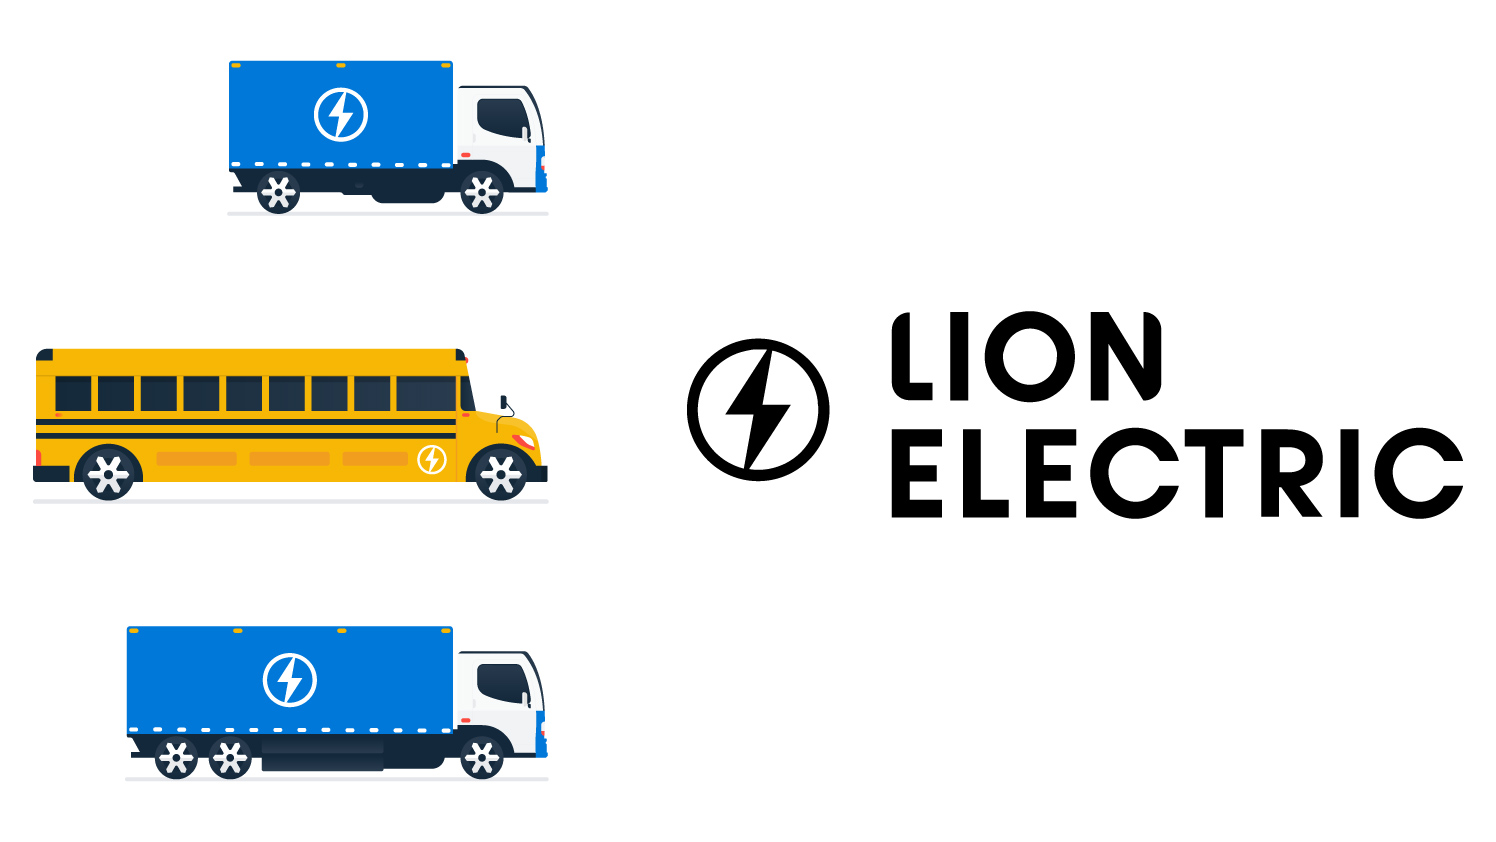 Lion electric trucks and busses illustration